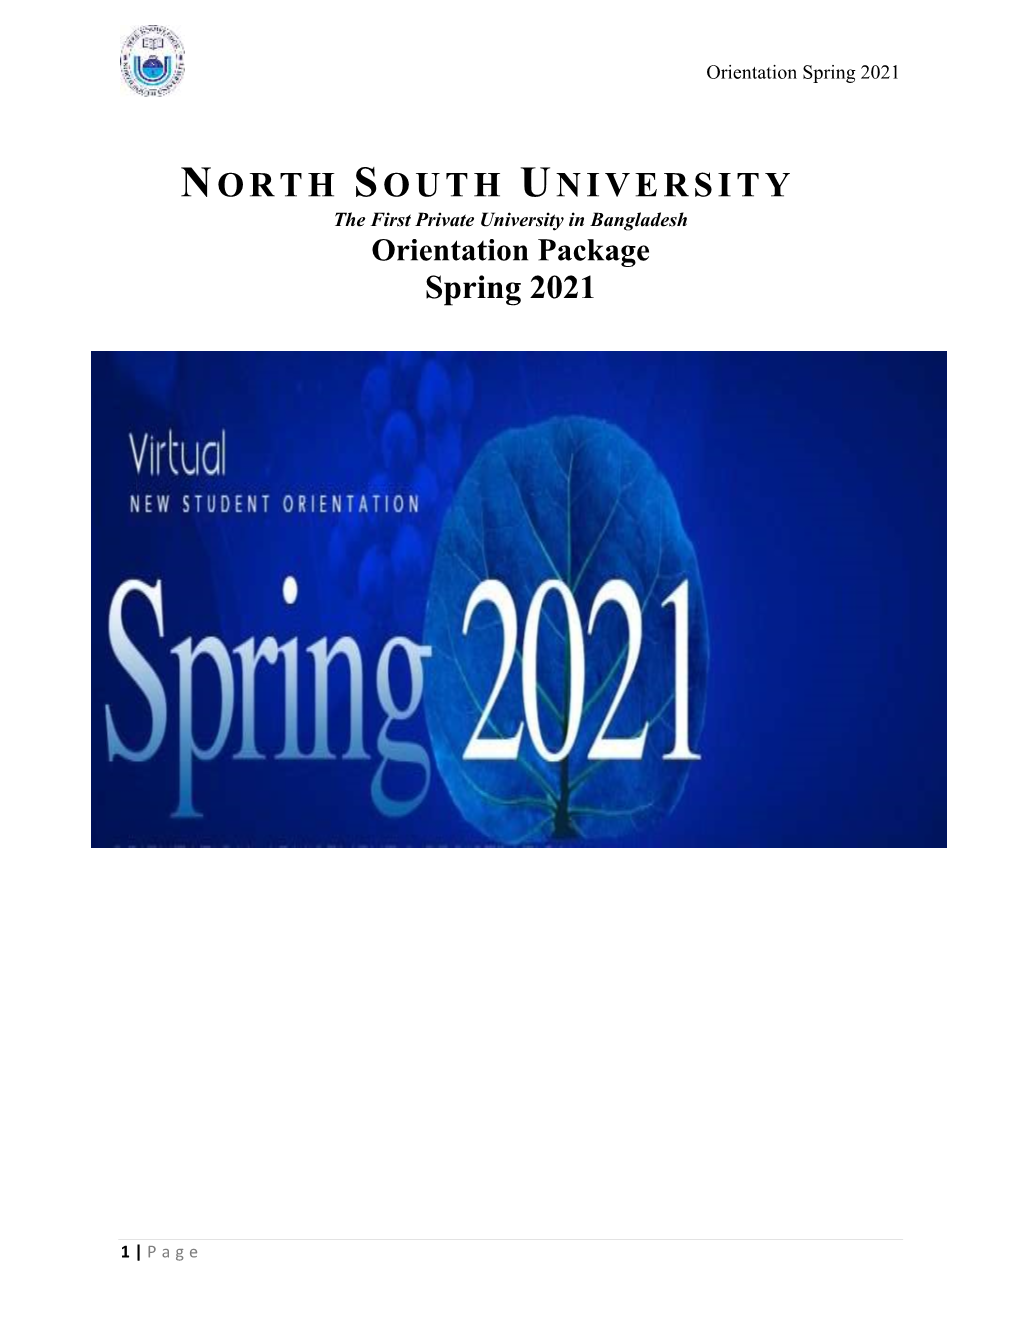 Orientation Package Spring 2021